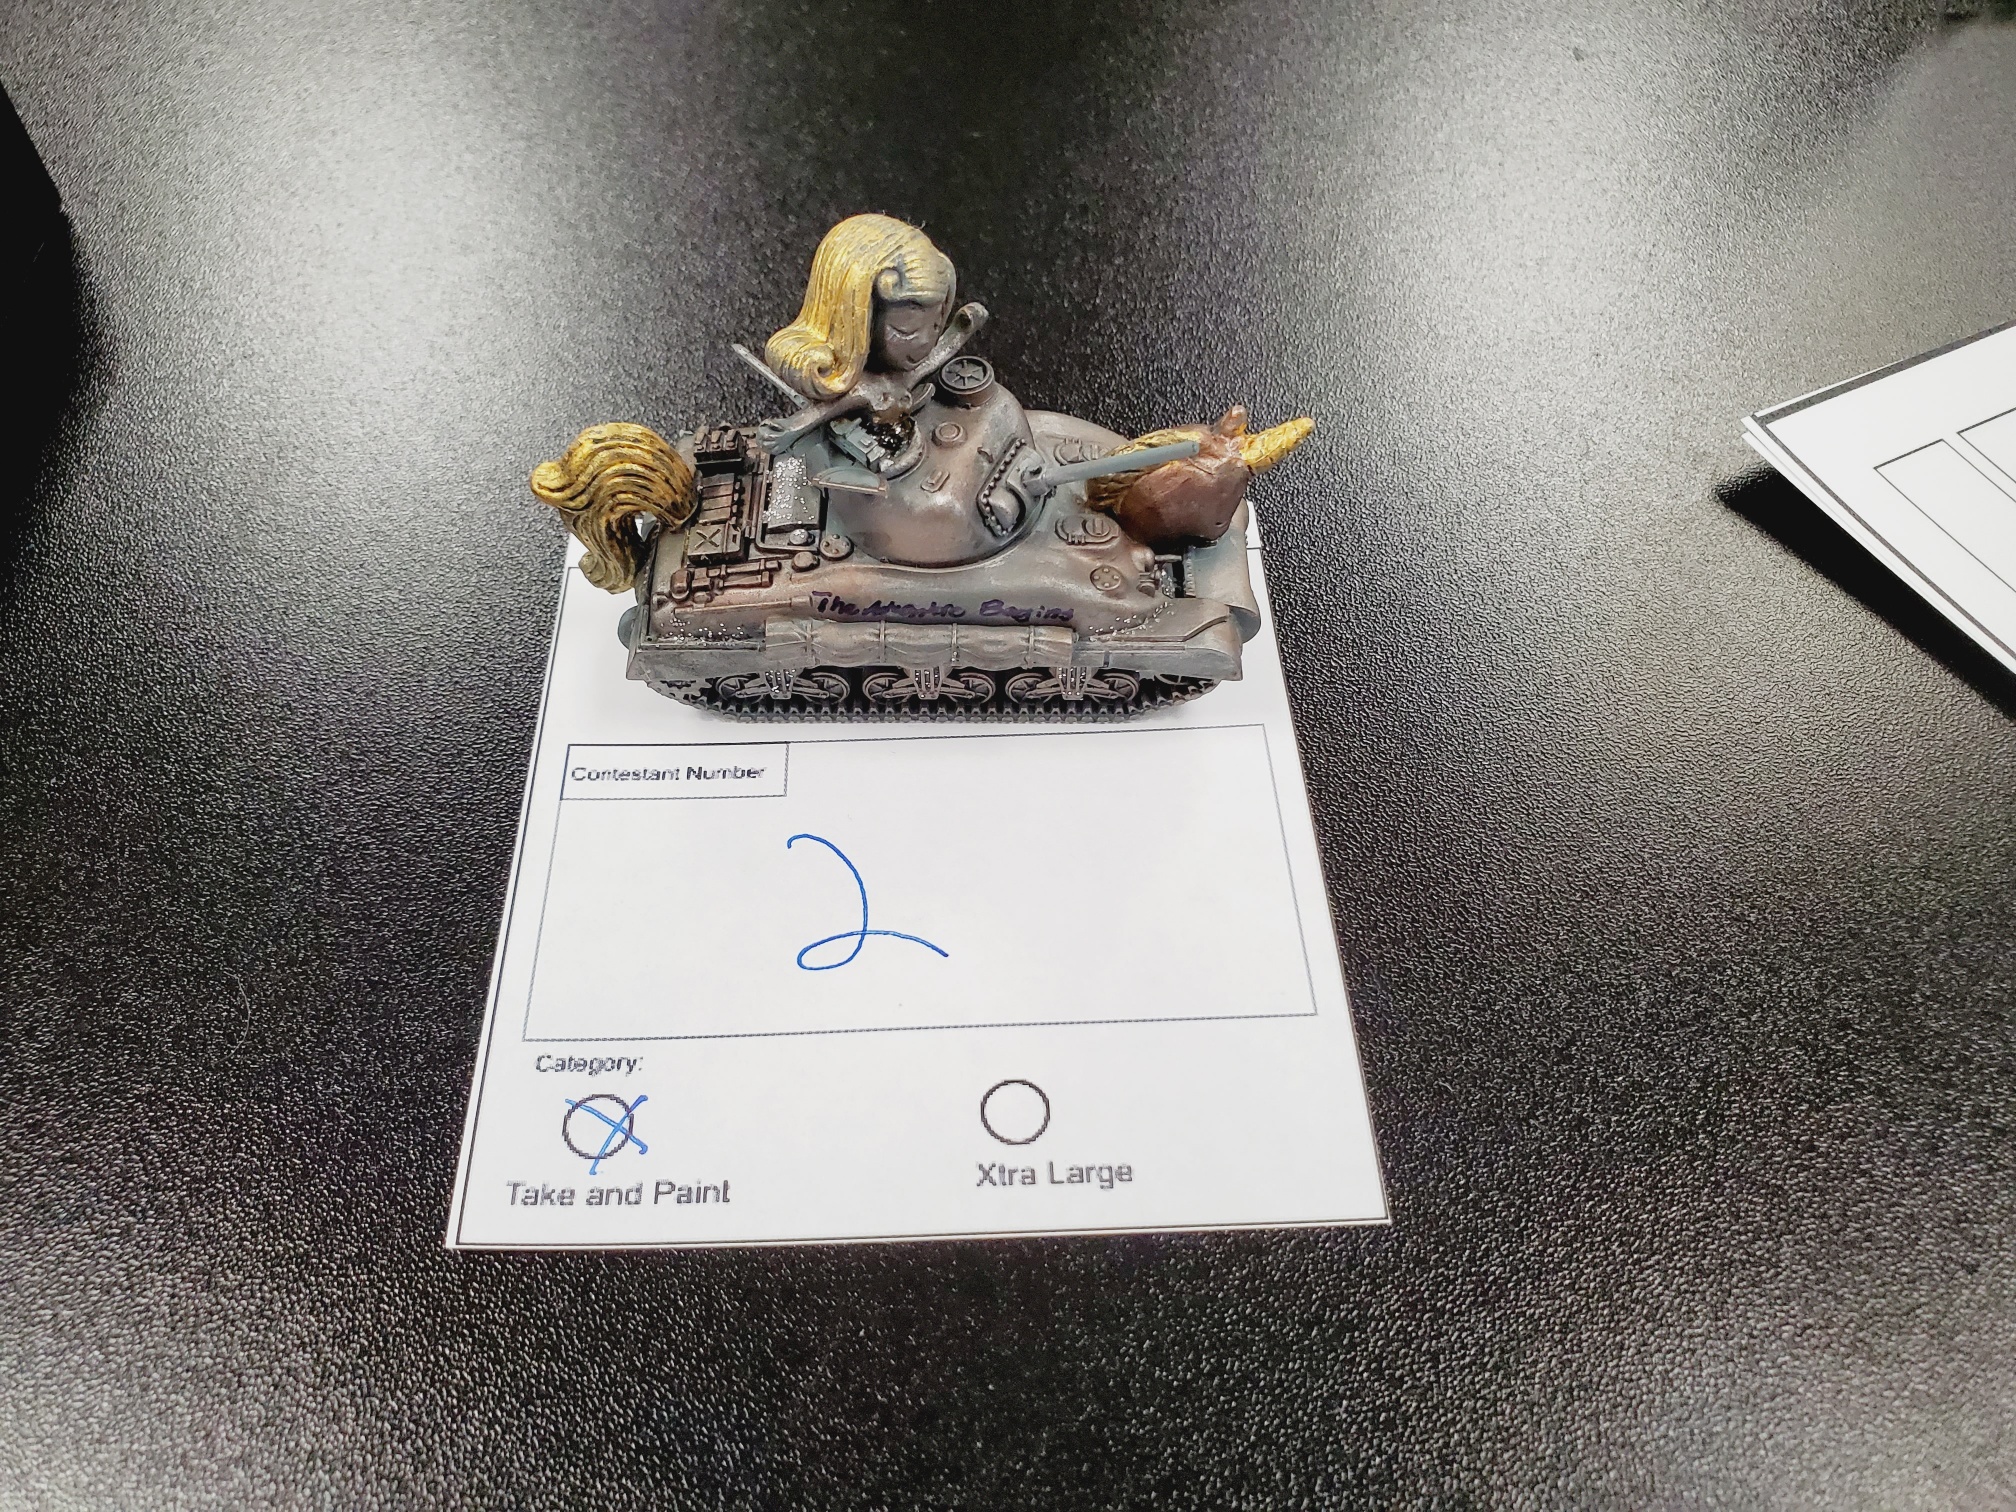 The Adventure Begins - Battlefront Take and Paint Mini Painting Competition